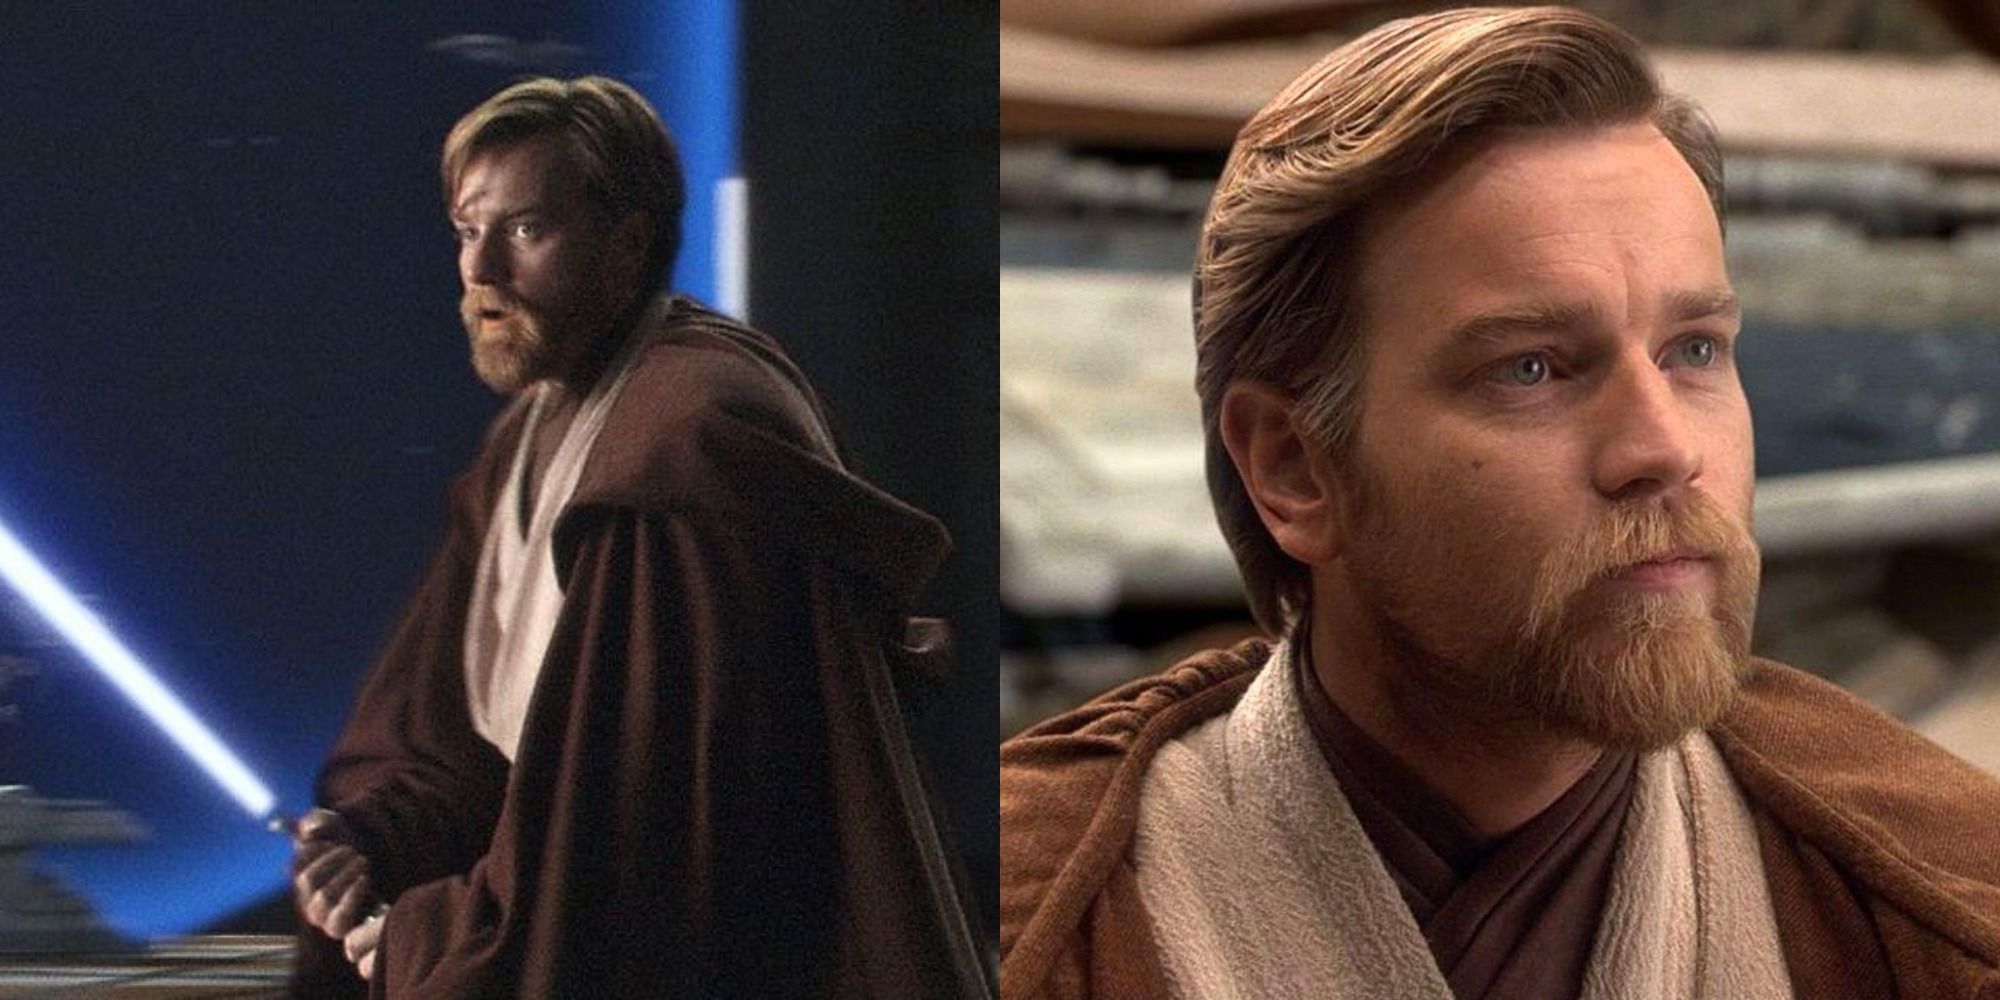 Split image showing Obi Wan with his lightsaber and looking confused in Star Wars.